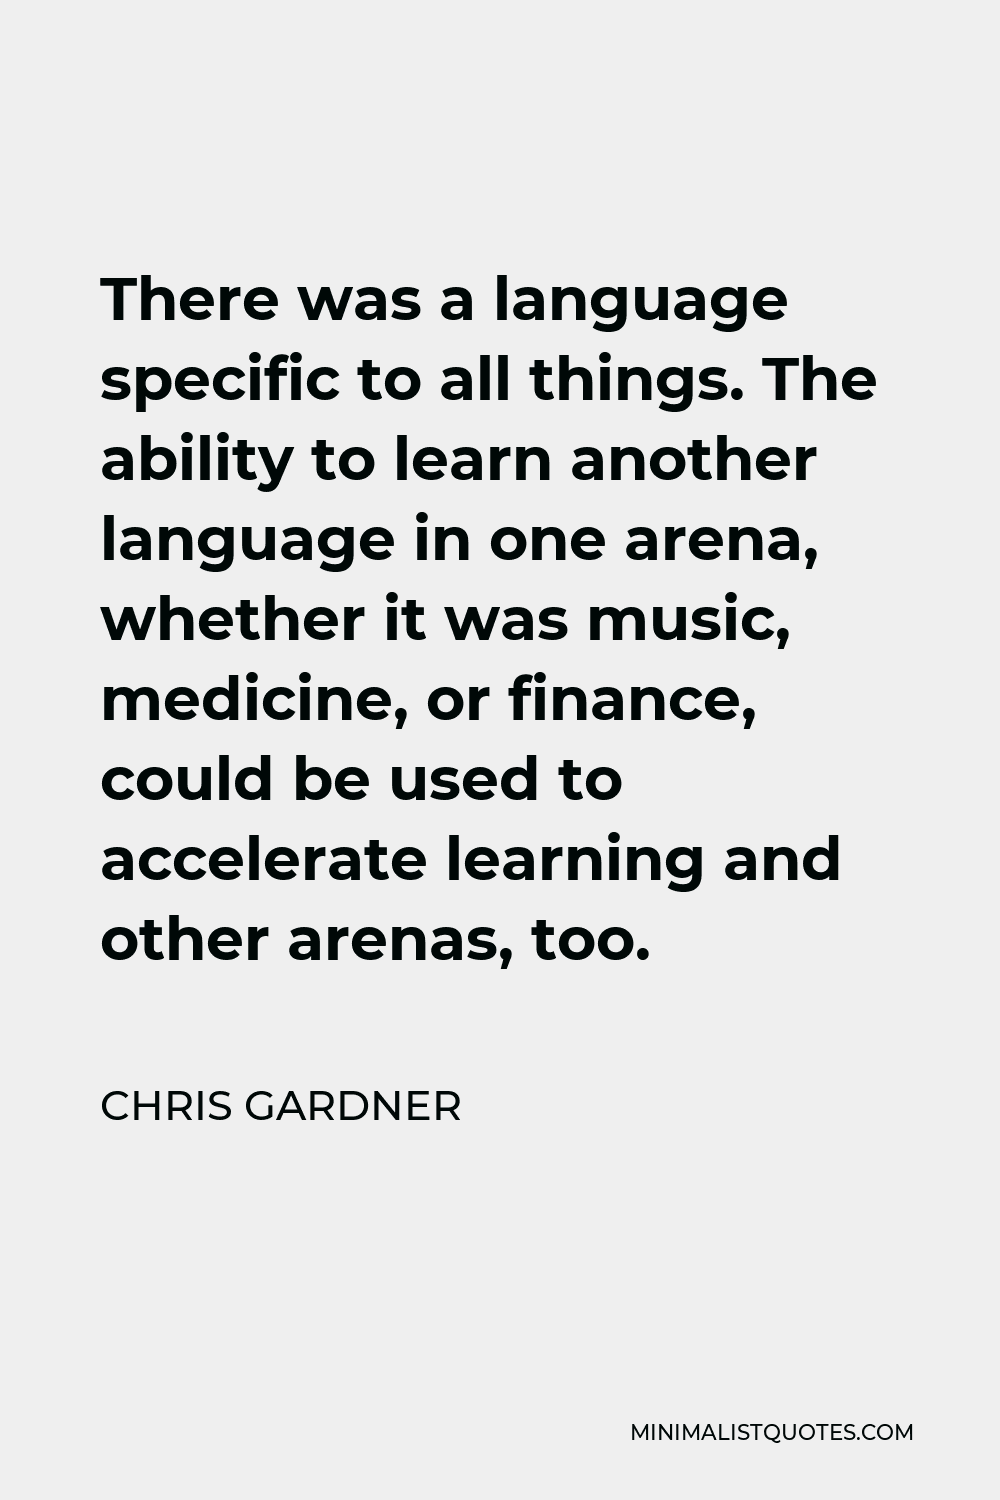 Chris Gardner Quote - There was a language specific to all things. The ability to learn another language in one arena, whether it was music, medicine, or finance, could be used to accelerate learning and other arenas, too.